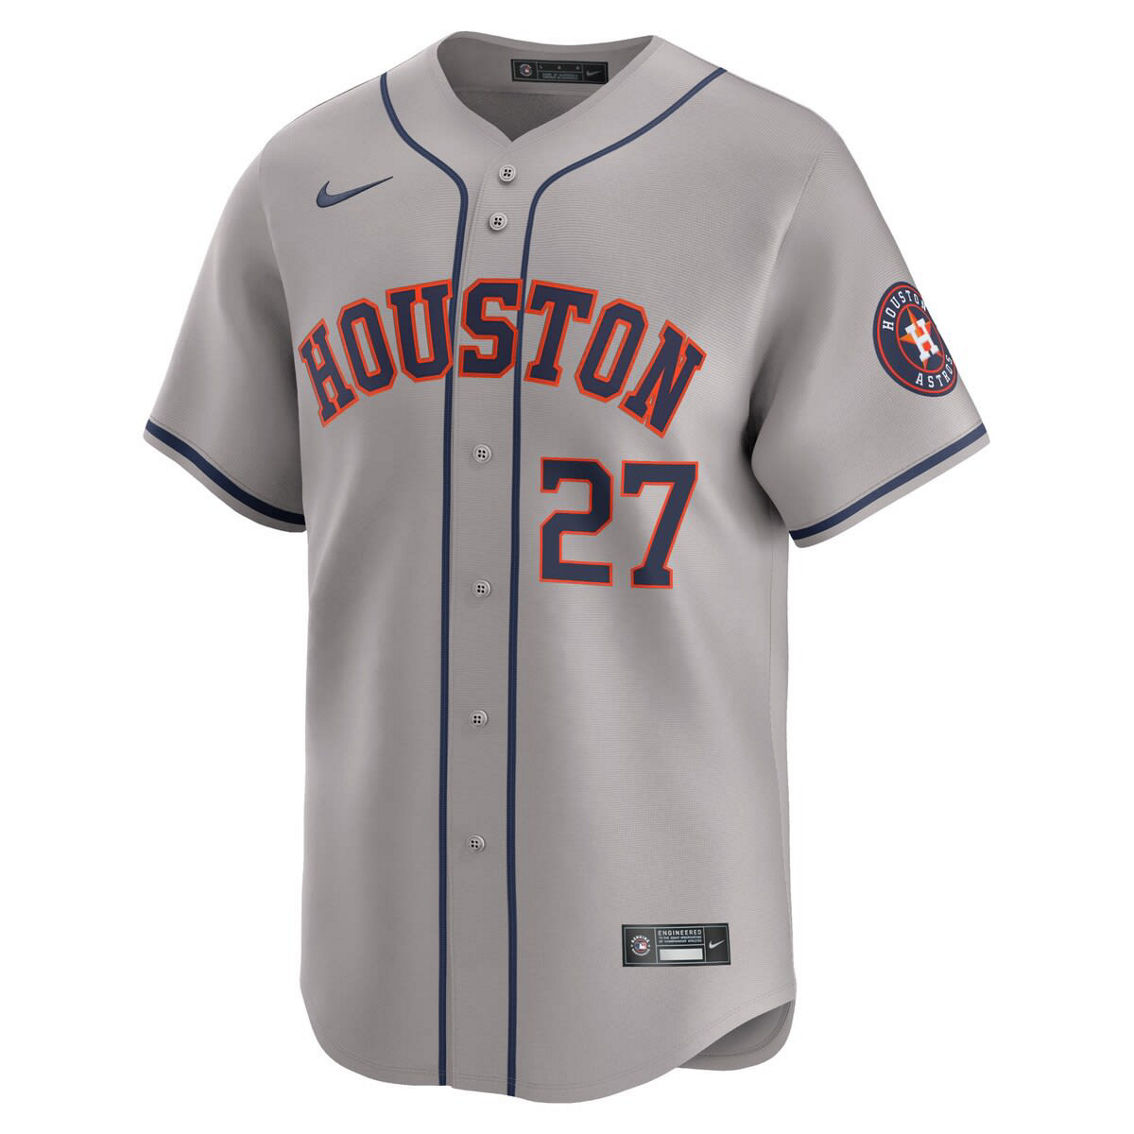 Nike Men's Jose Altuve Gray Houston Astros Away Limited Player Jersey - Image 3 of 4